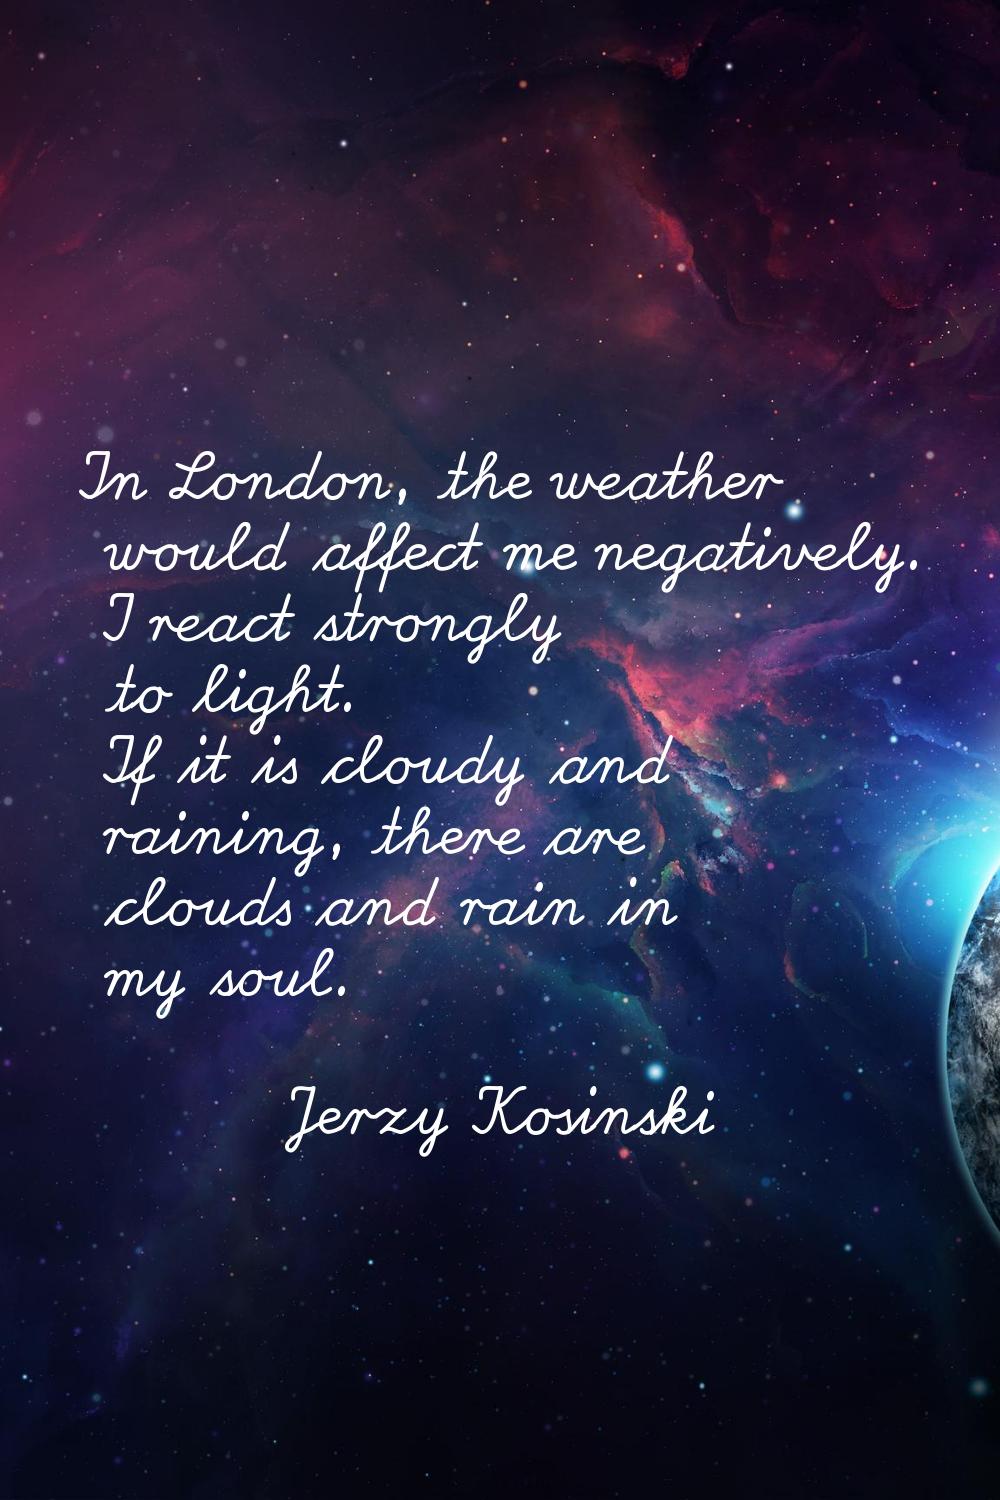 In London, the weather would affect me negatively. I react strongly to light. If it is cloudy and r